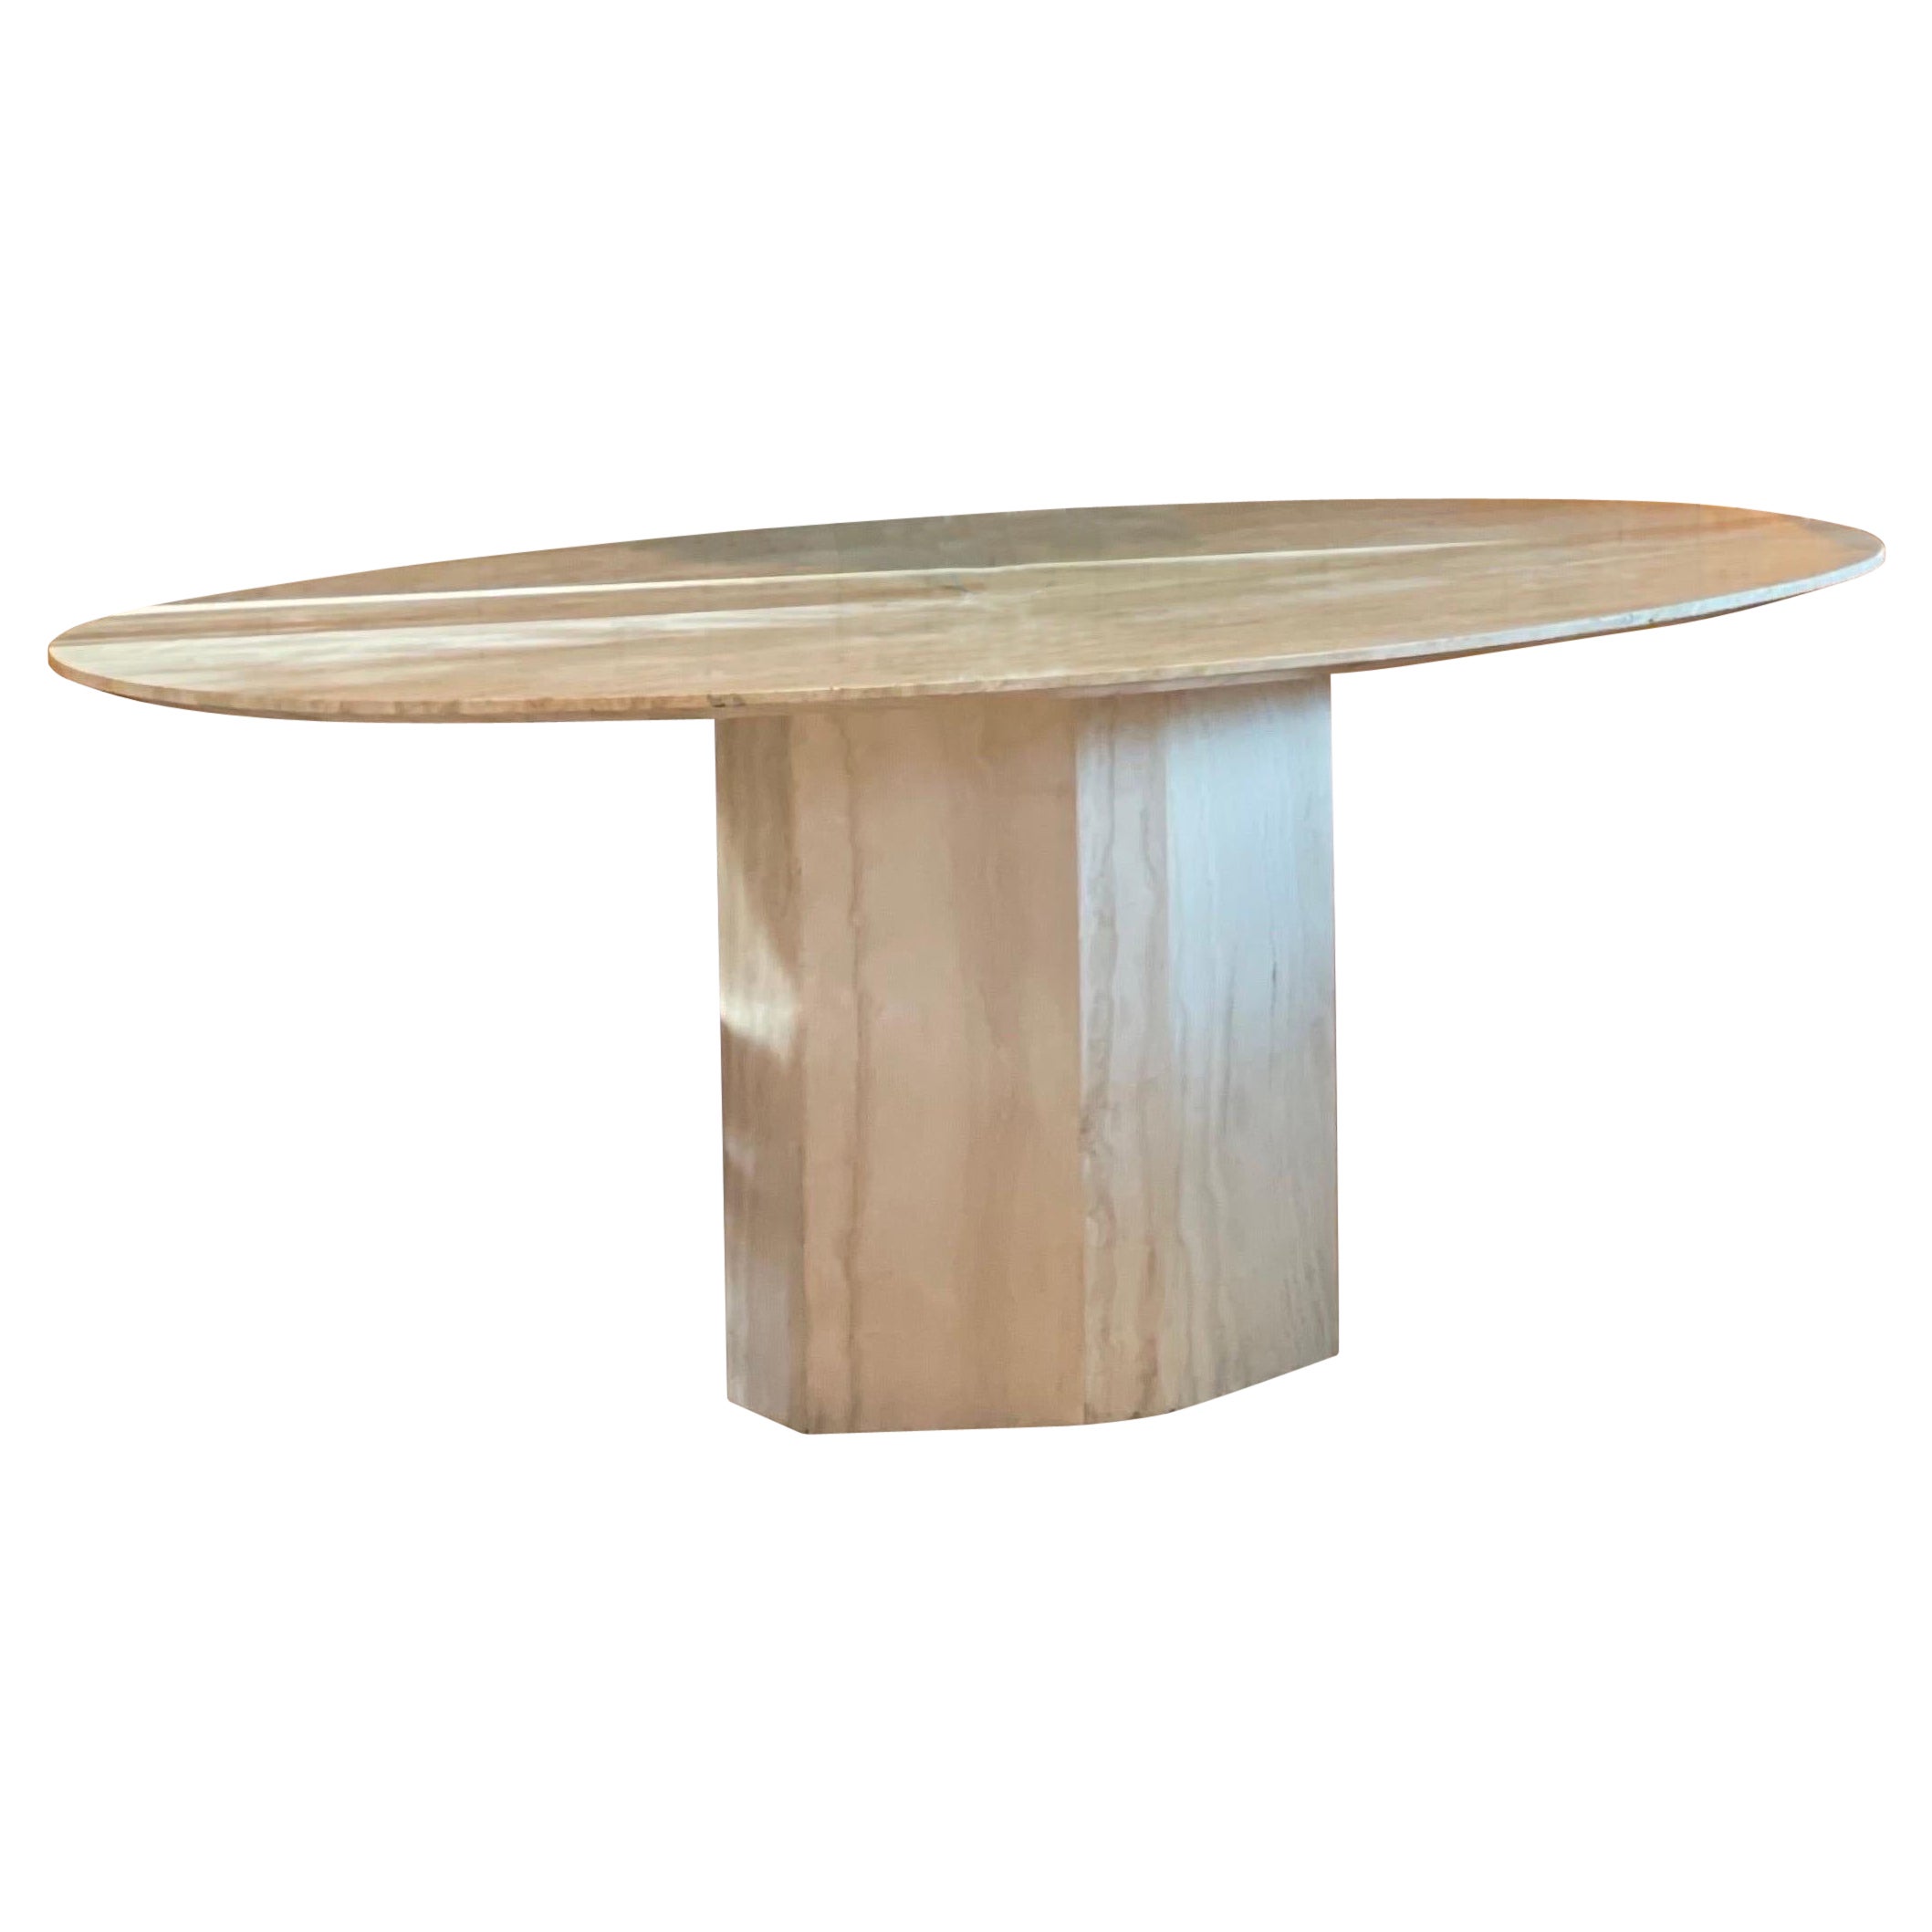 What is a travertine table?